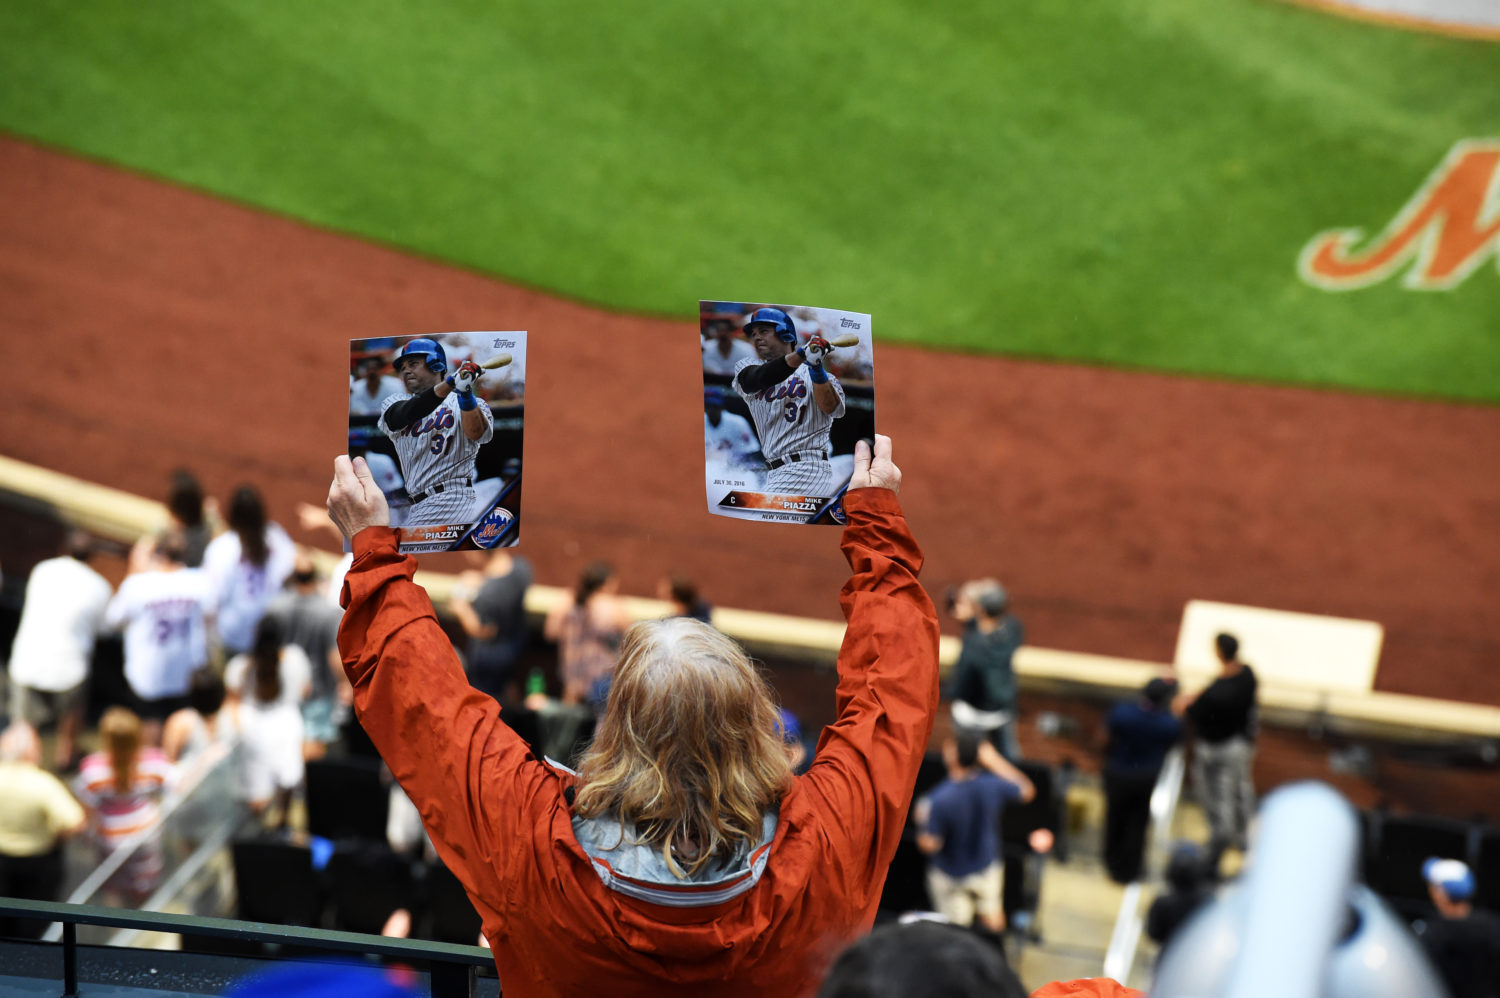 Fan Holding Two Photos of Mike Piazza in the Stands